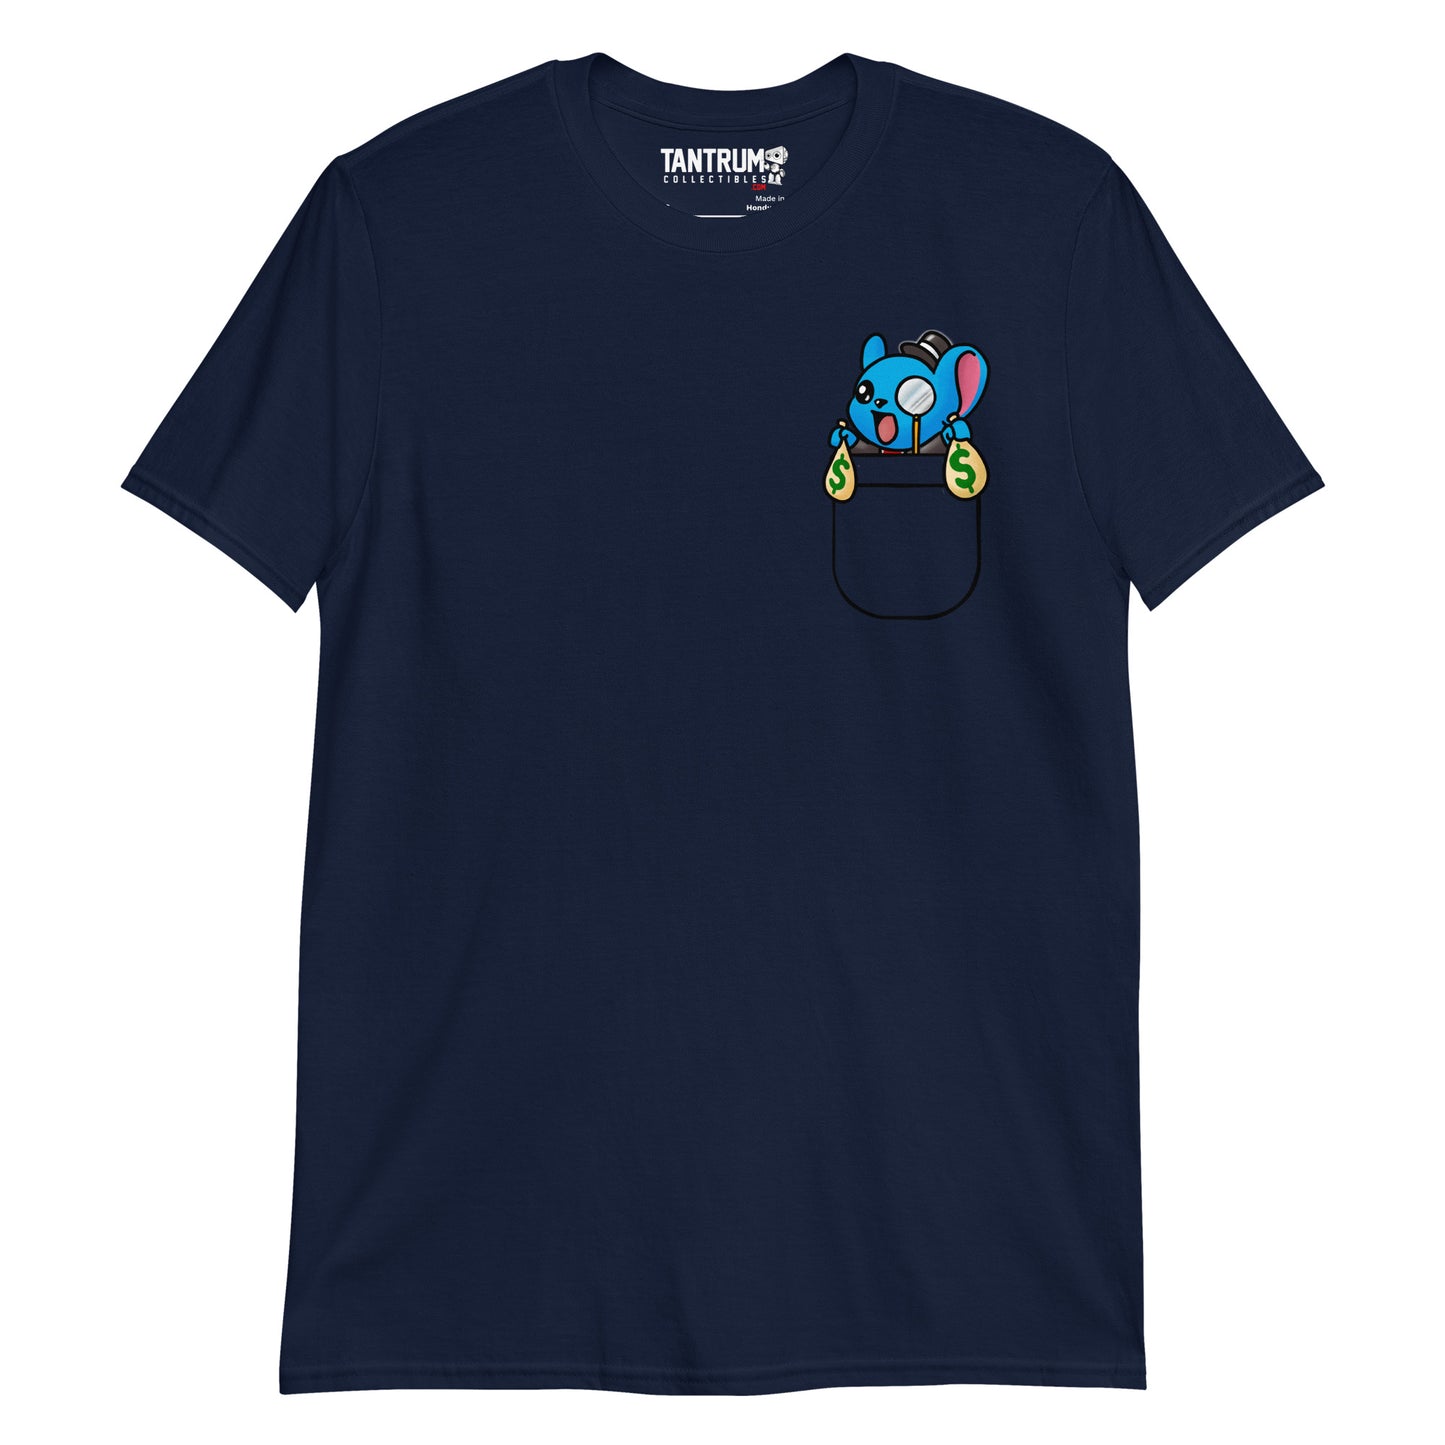 MrMightyMouse - Unisex T-Shirt - Printed Pocket Rich